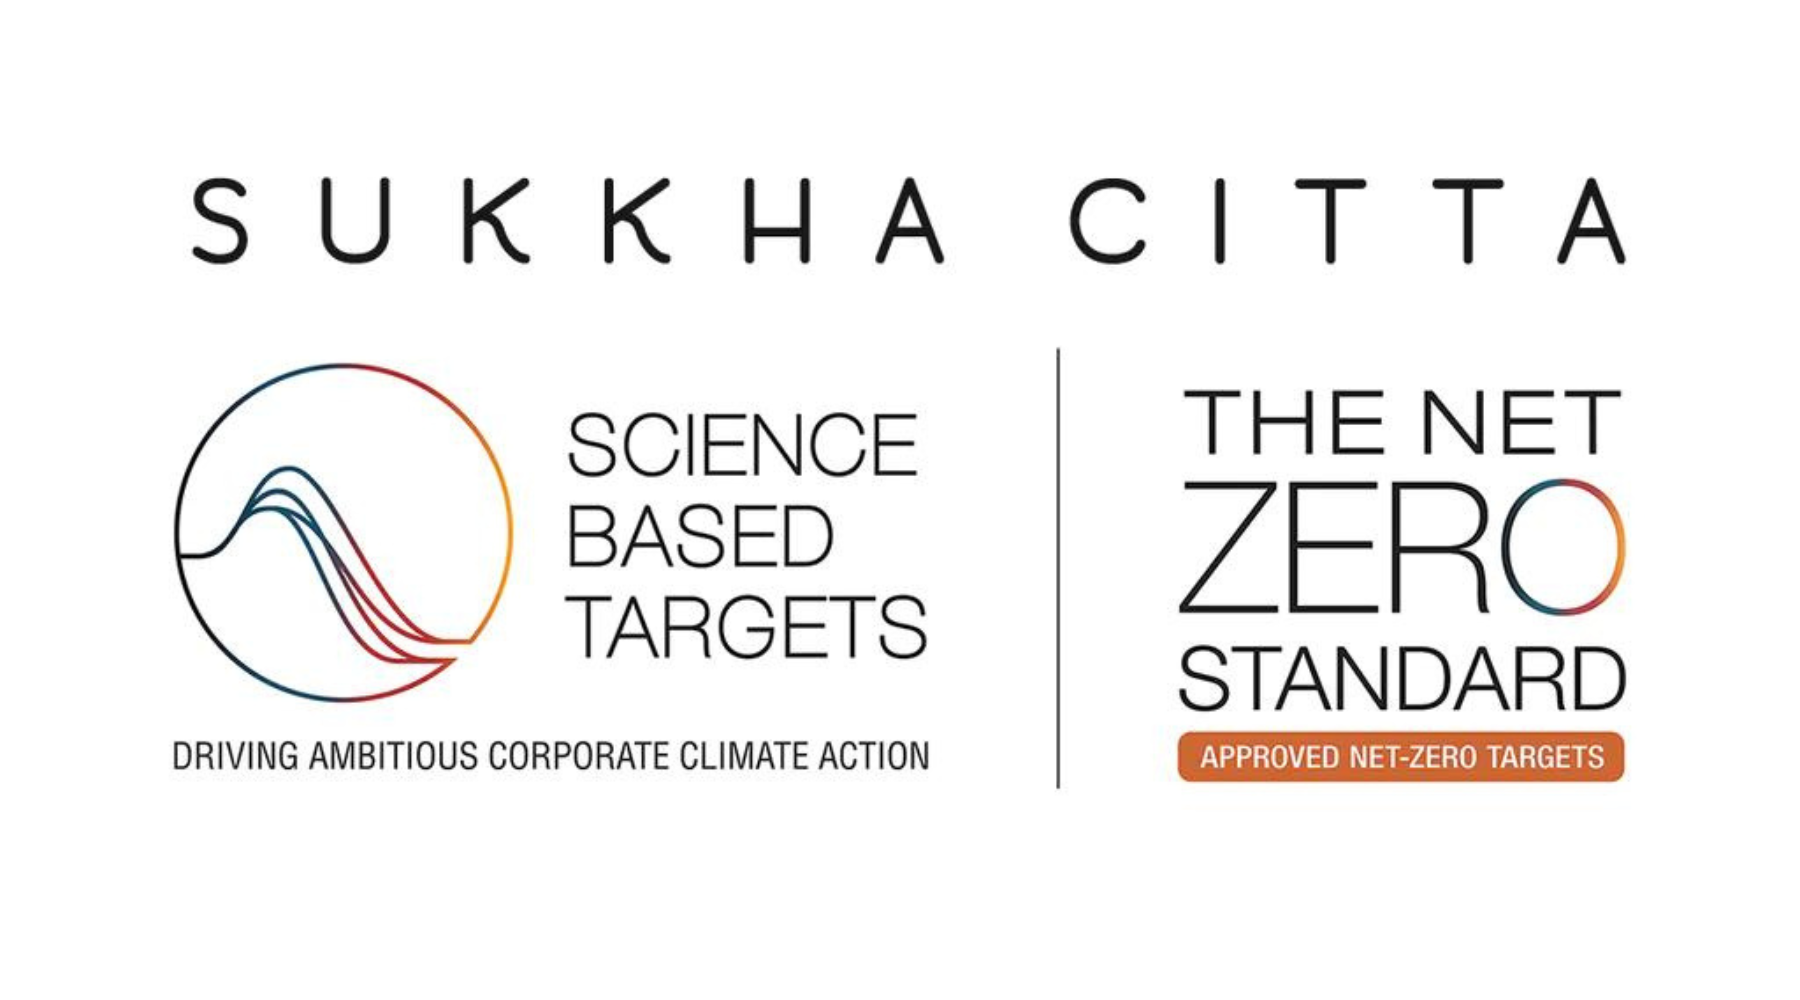 SukkhaCitta Taking the Lead in Tackling Climate Change - Validated by Science-Based Targets initiative